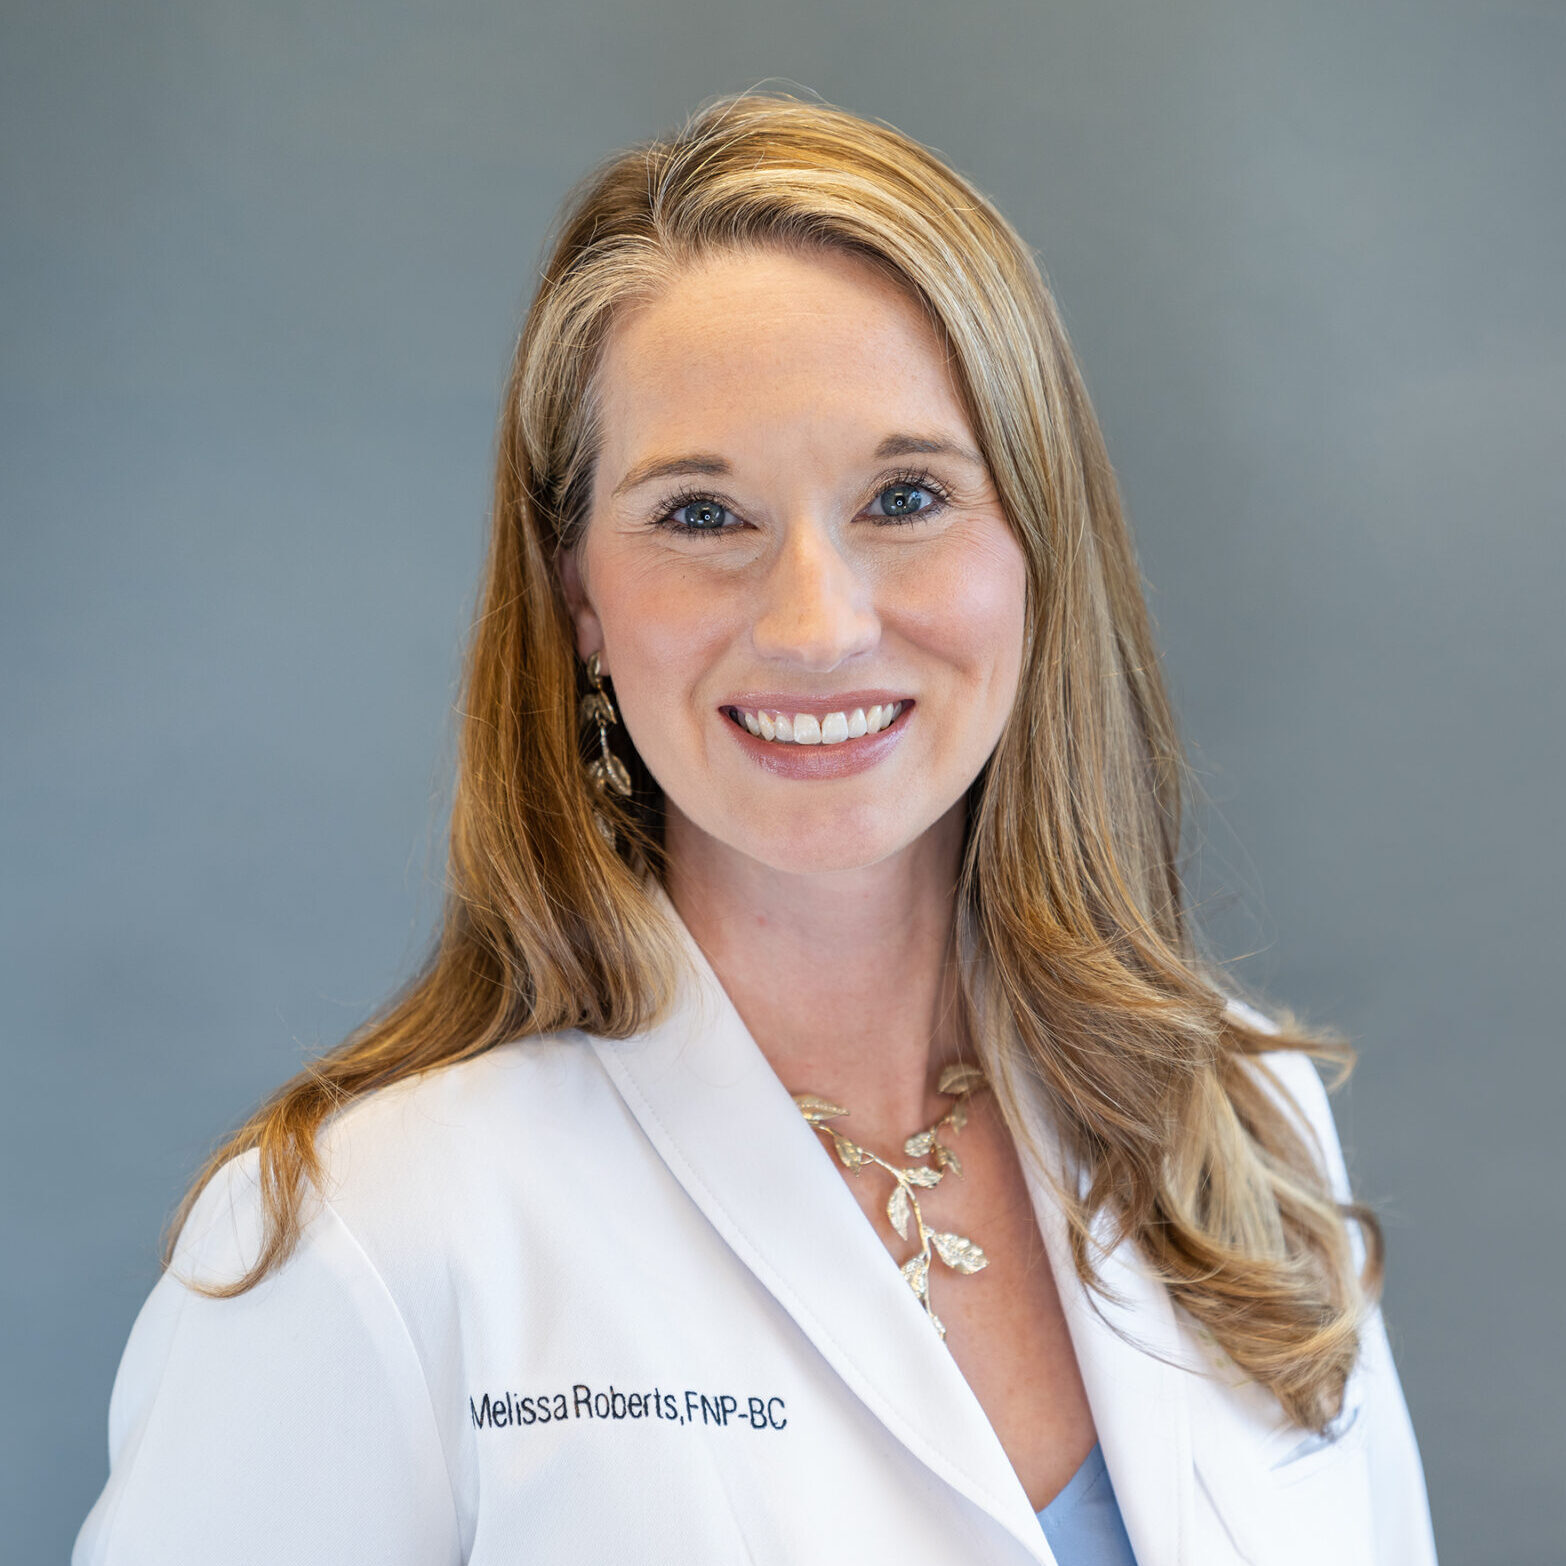 Melissa is a Knoxville native who has over 20 years of experience in the medical field. She is board certified through the AANP and has practiced in the specialty of gastroenterology since 2015.